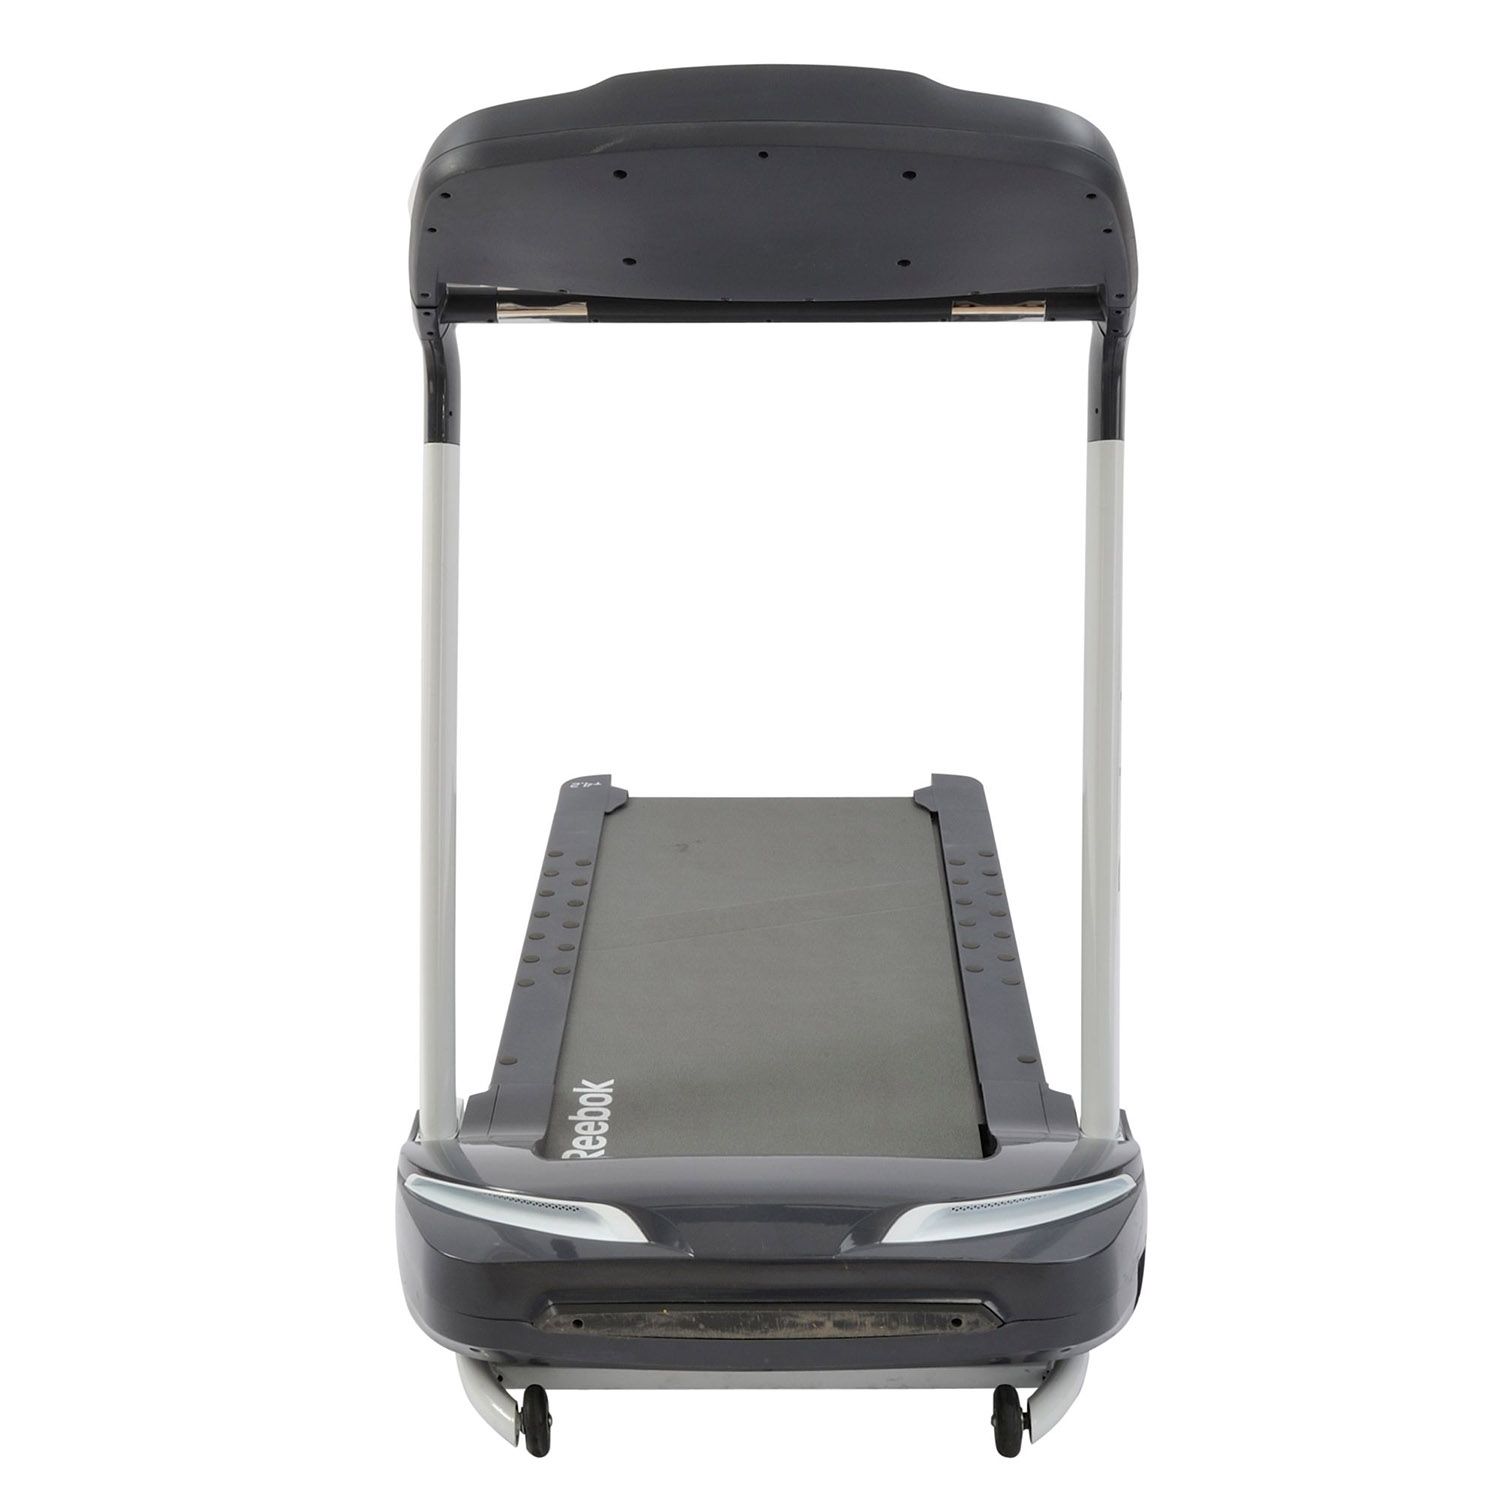 Fitness Performance Treadmill Buy Online best price in UAE-Fitness House